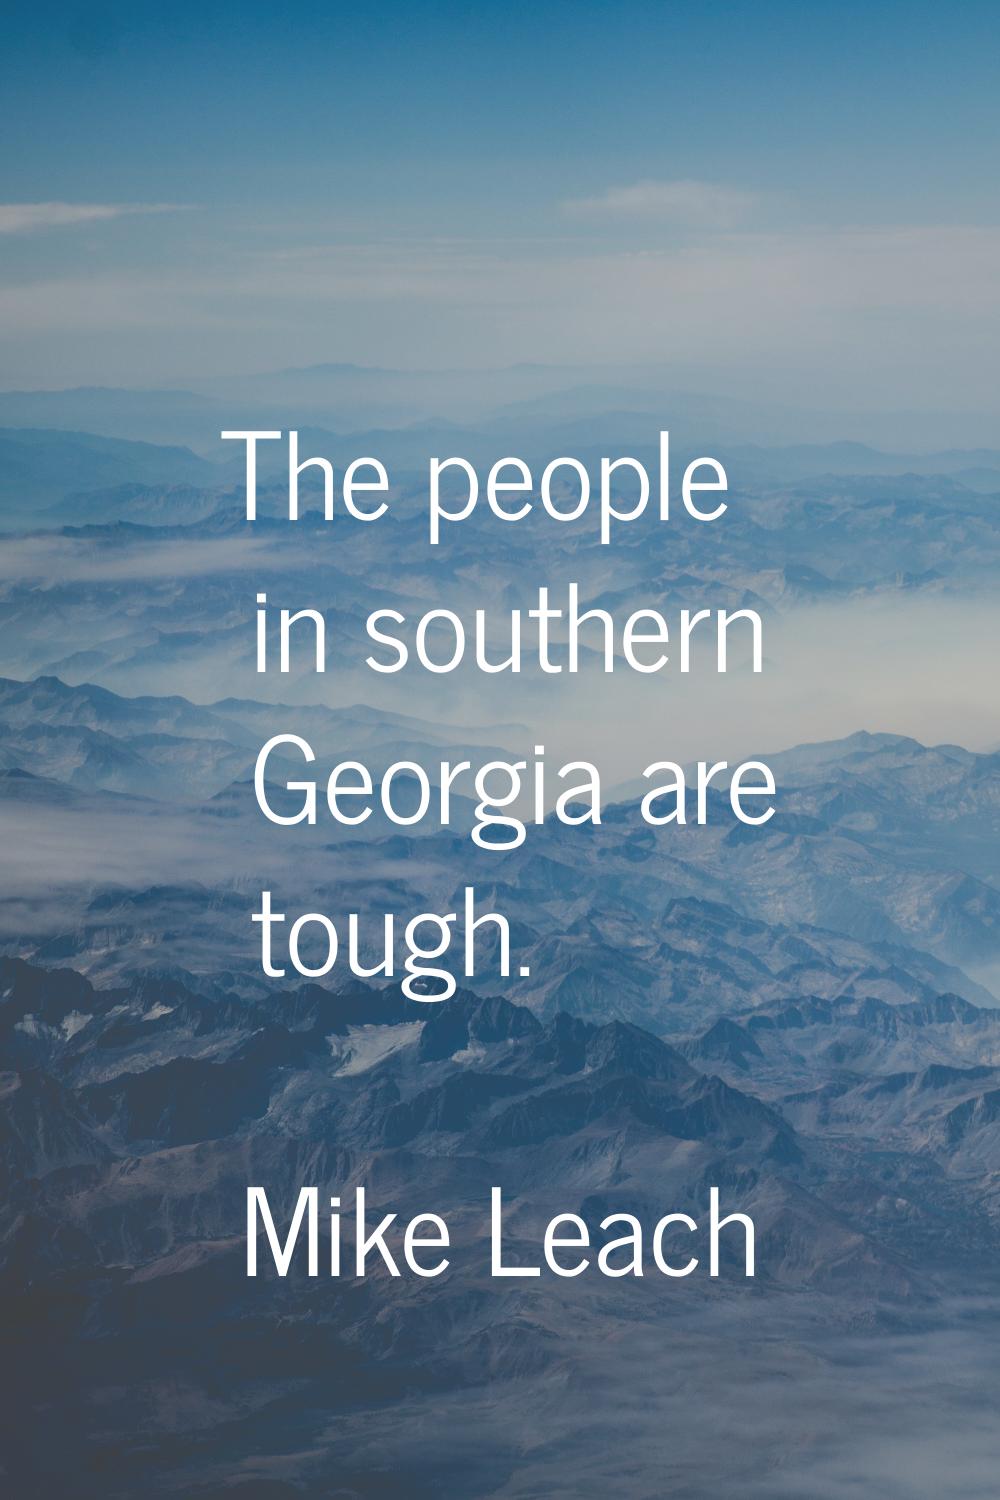 The people in southern Georgia are tough.